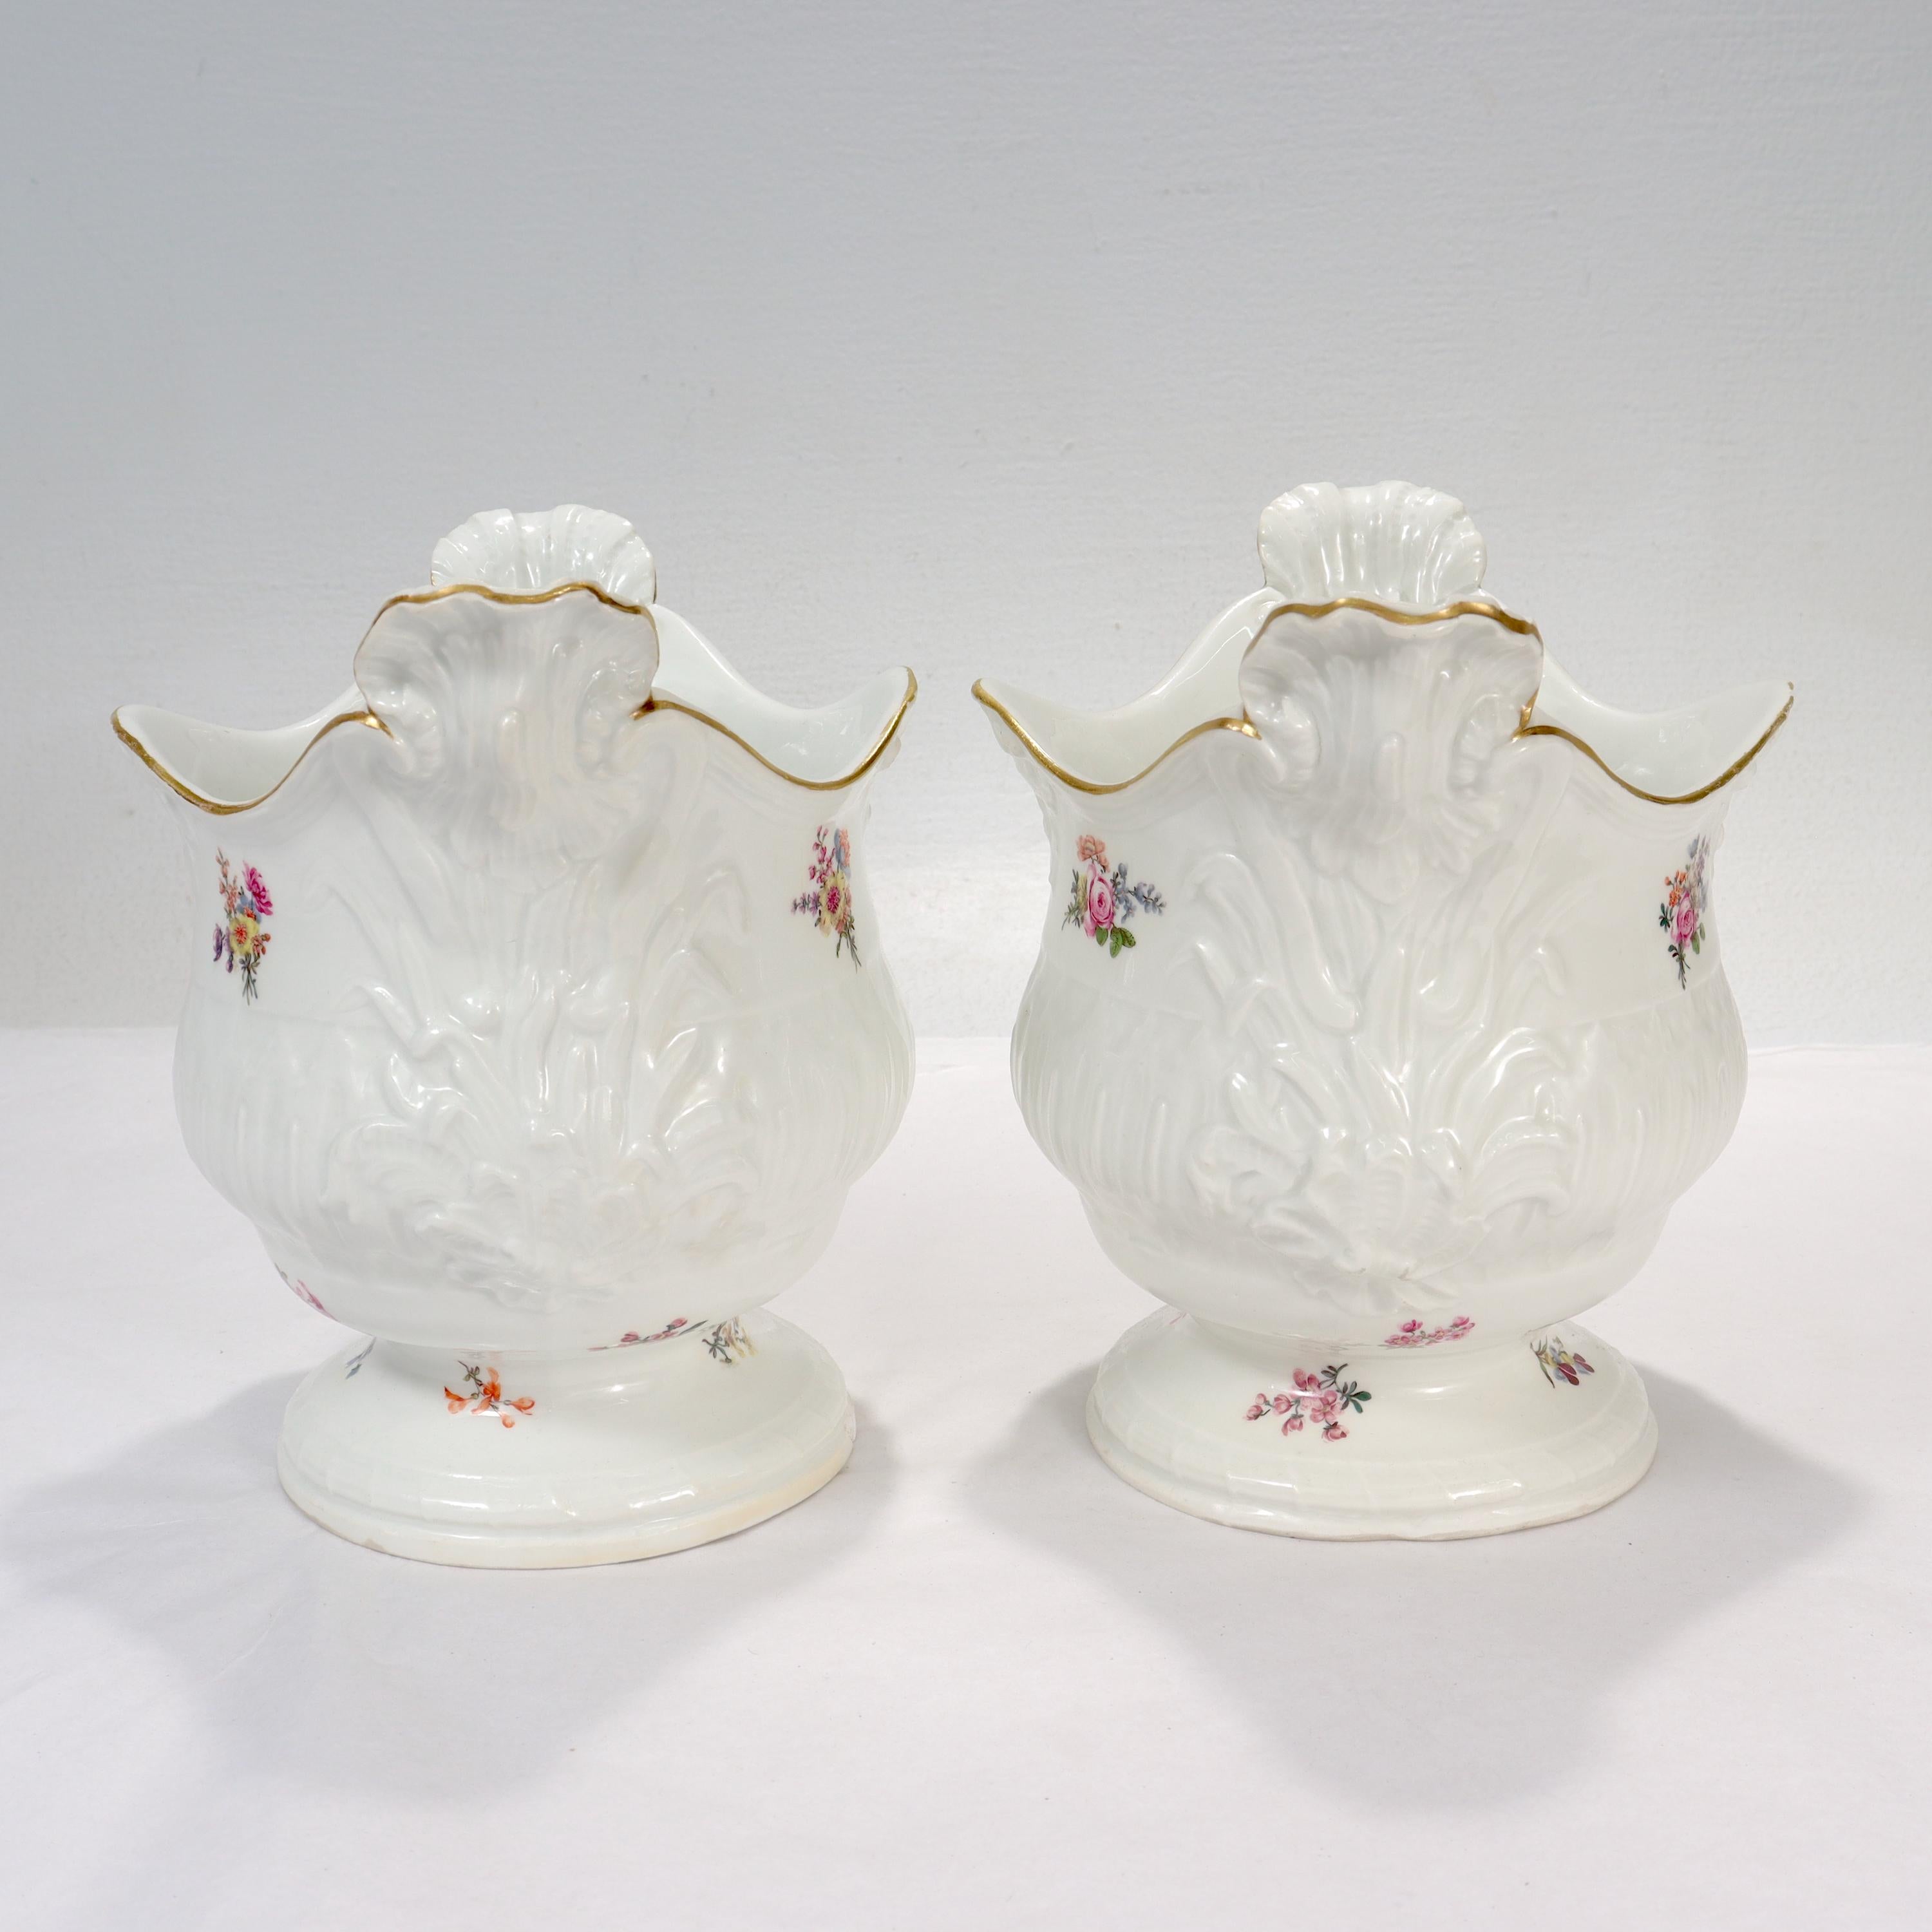 Pair of Antique 18th / 19th Century Meissen Porcelain Cachepots or Flower Pots In Good Condition For Sale In Philadelphia, PA